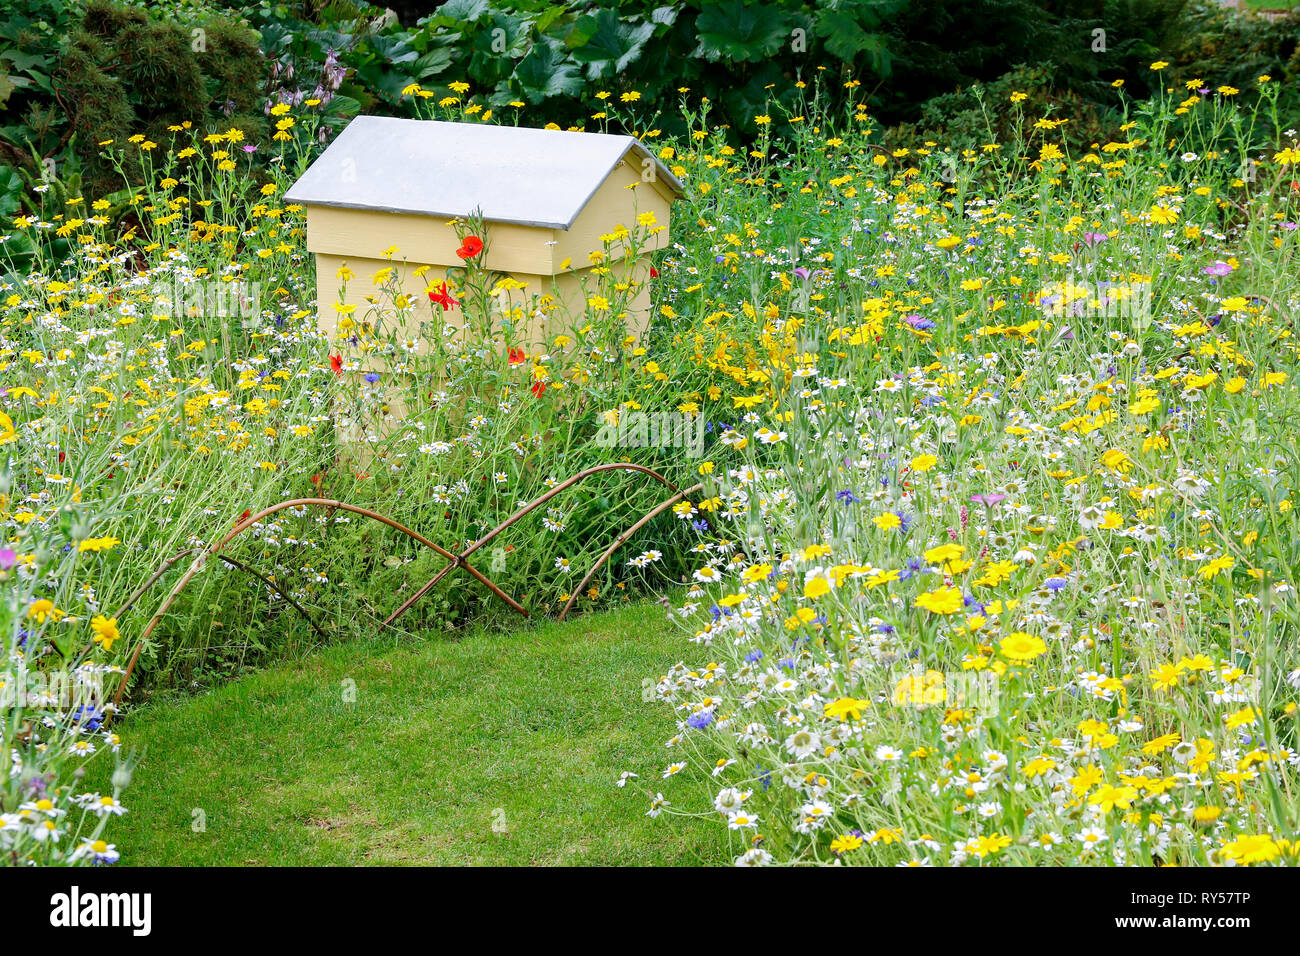 A bee hive set in a wildflower garden amongst yellow, purple, white and red flowers Stock Photo